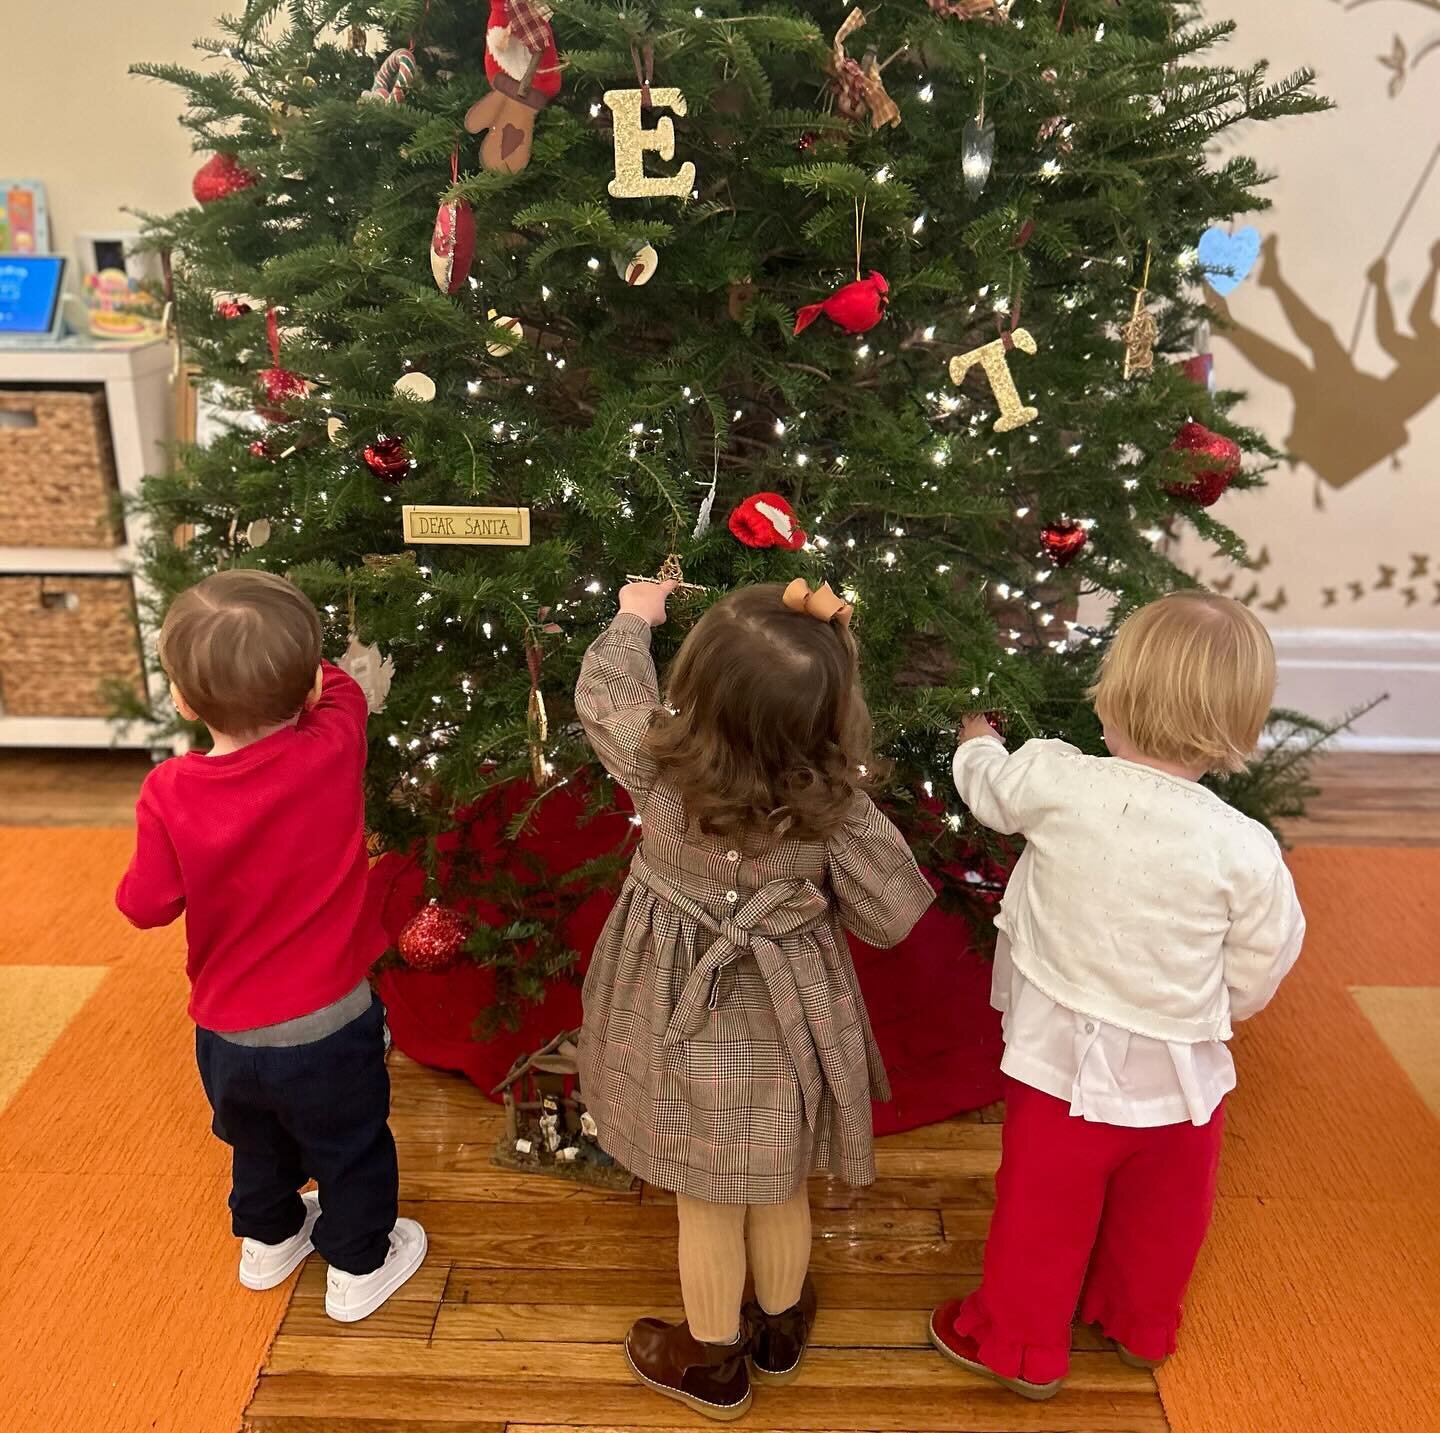 Merry Christmas from our home to yours! 🎄

#littlelearning #littlelearninginc #wherelearningfeelslikemagic #christmas #love #nyc #ues